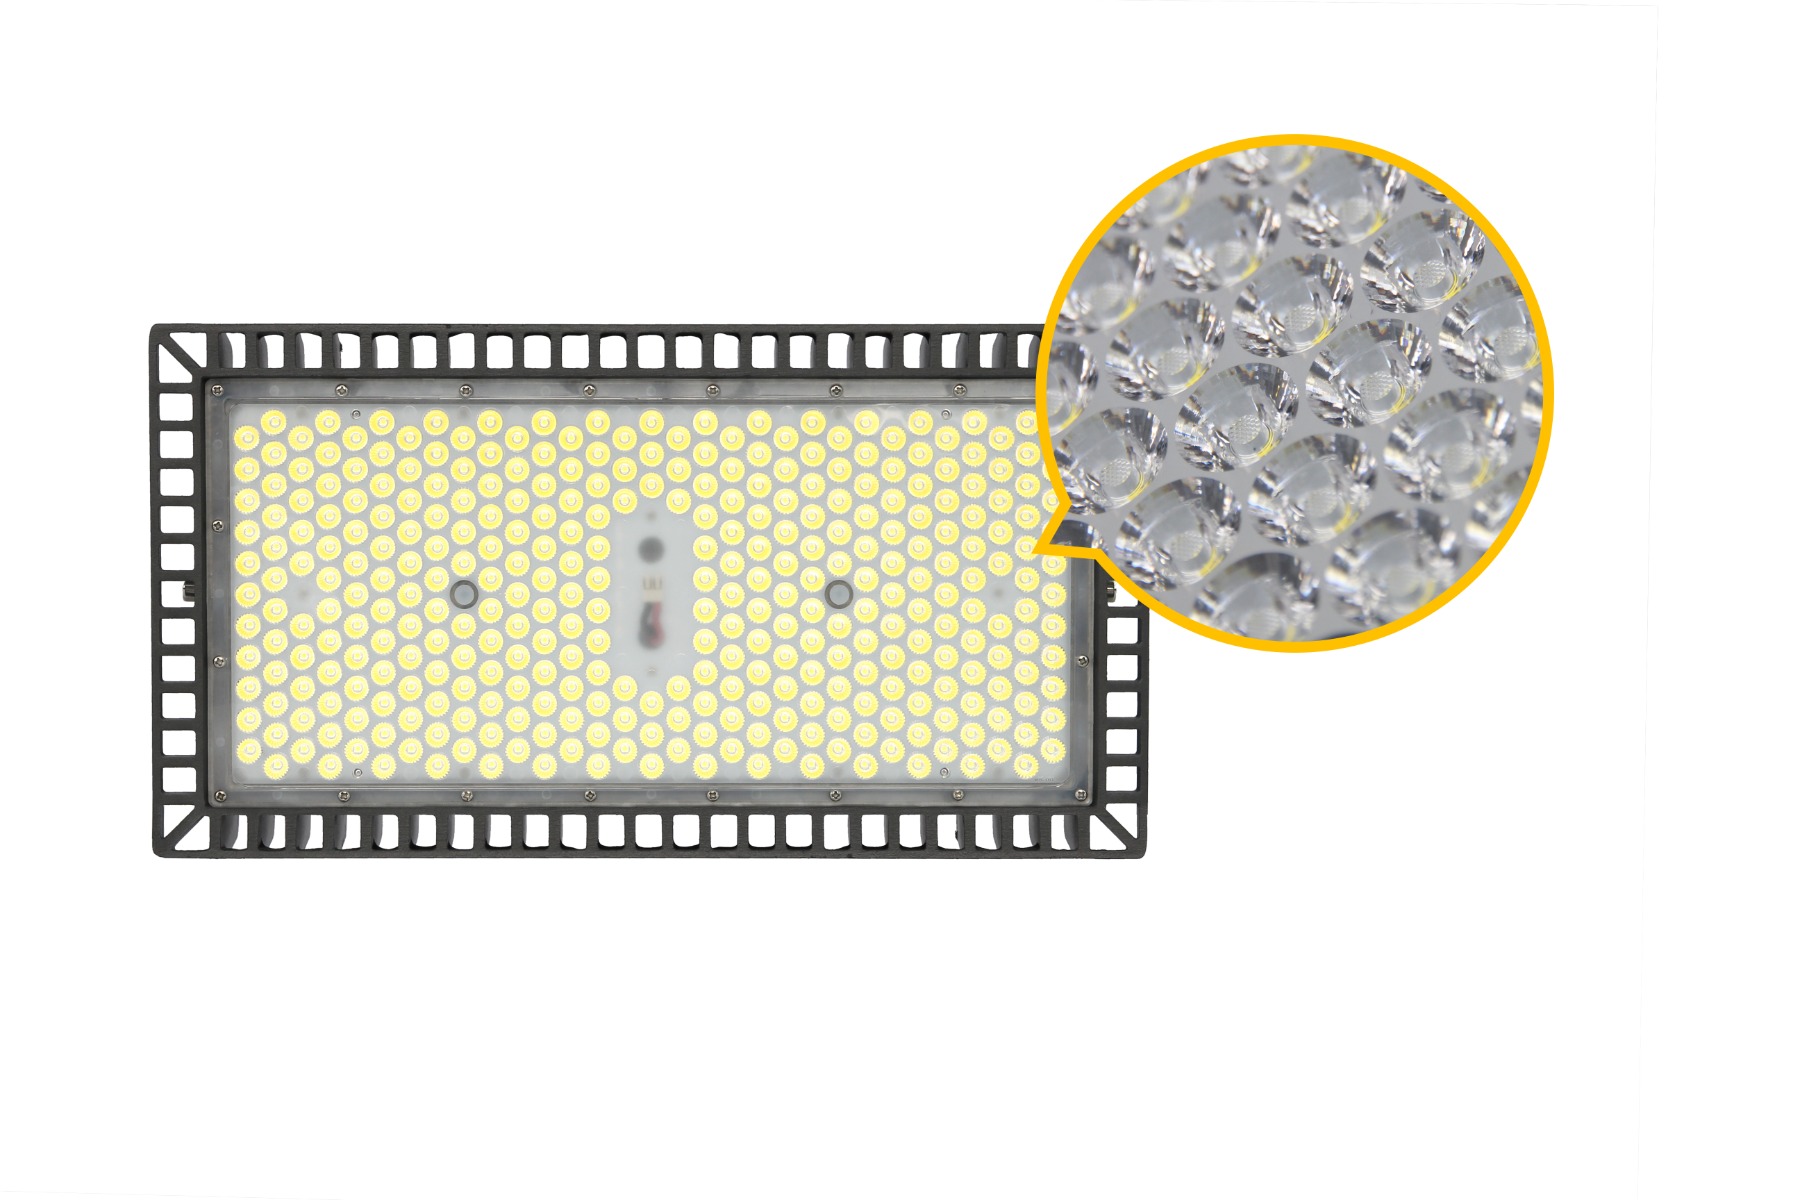 Projecteur de Stade LED 900W SMD3030 Cree Brand Chips avec driver Meanwell IP65